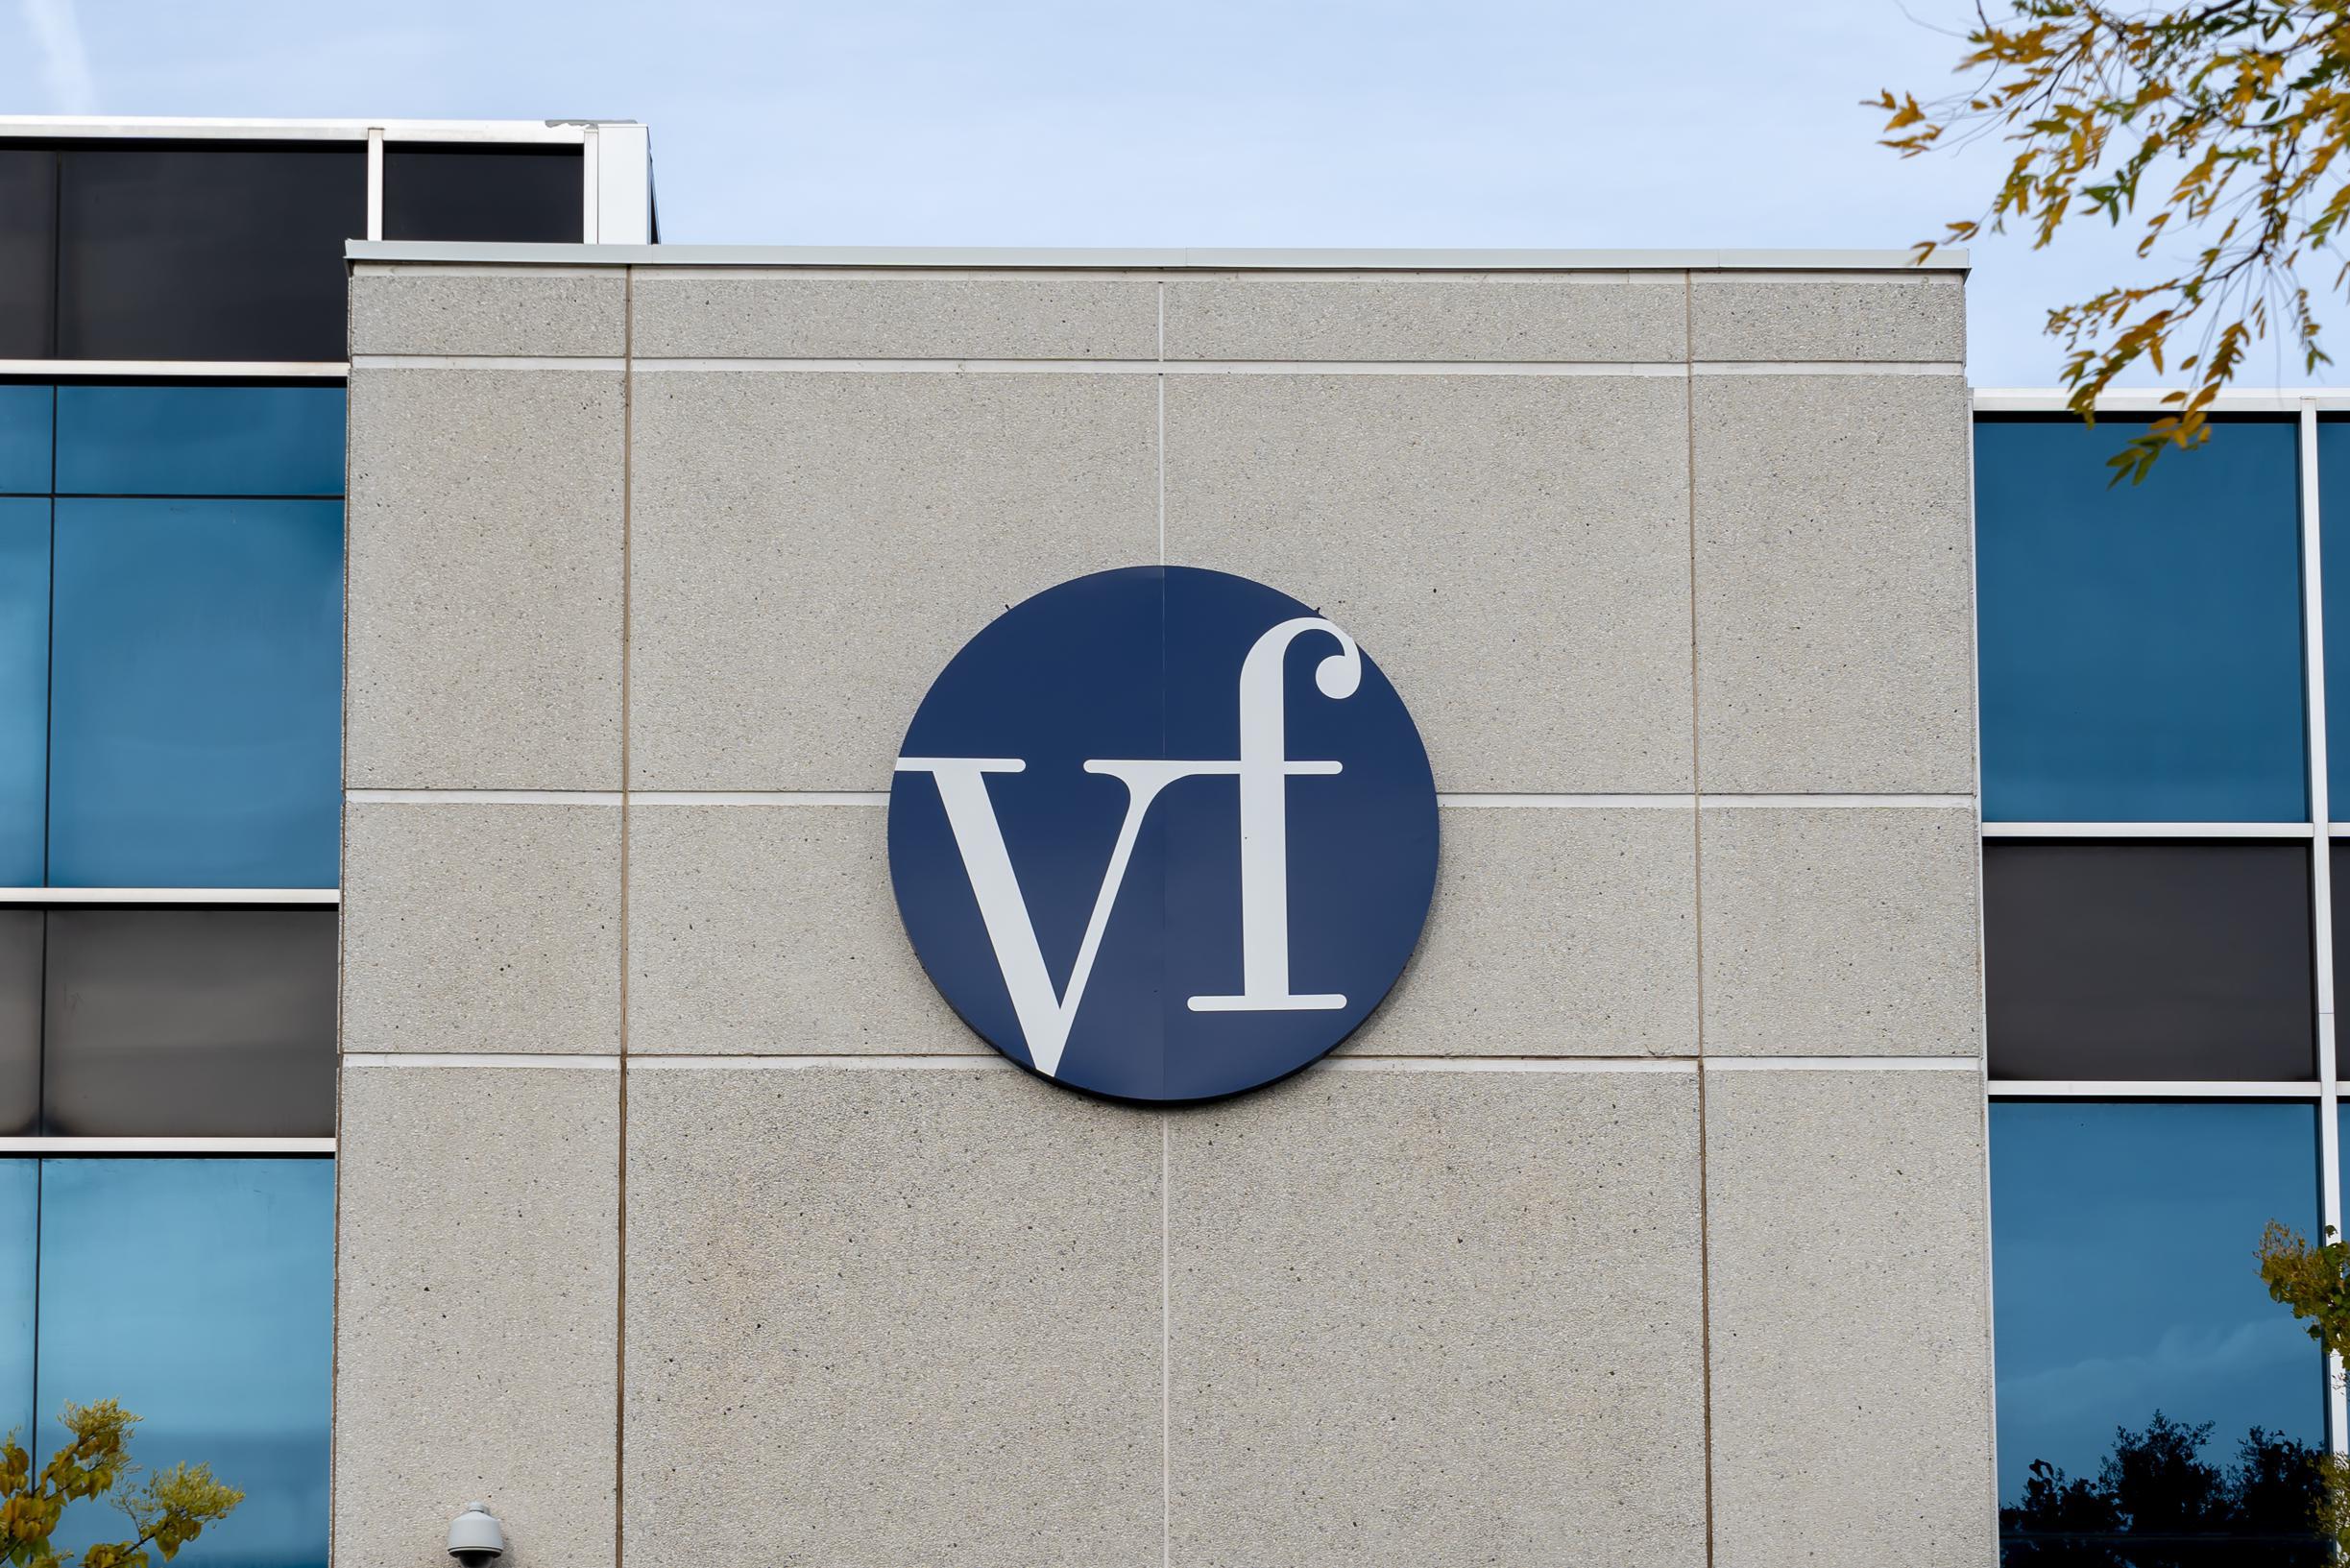 VF Clothing Company in Belgium Undergoing Restructuring: 100 Jobs in Jeopardy